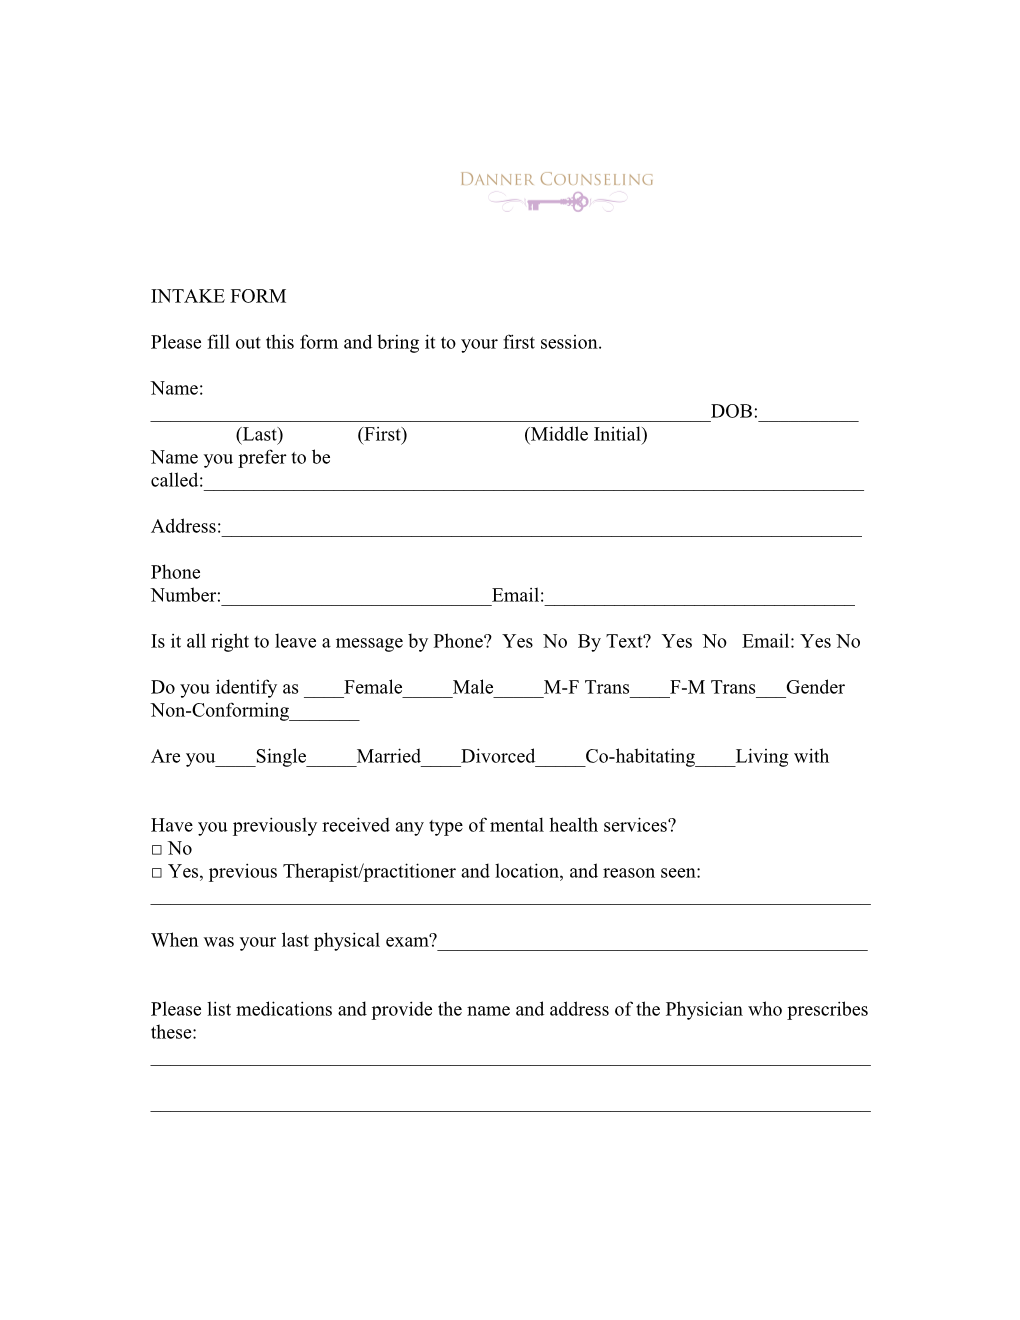 Please Fill out This Form and Bring It to Your First Session